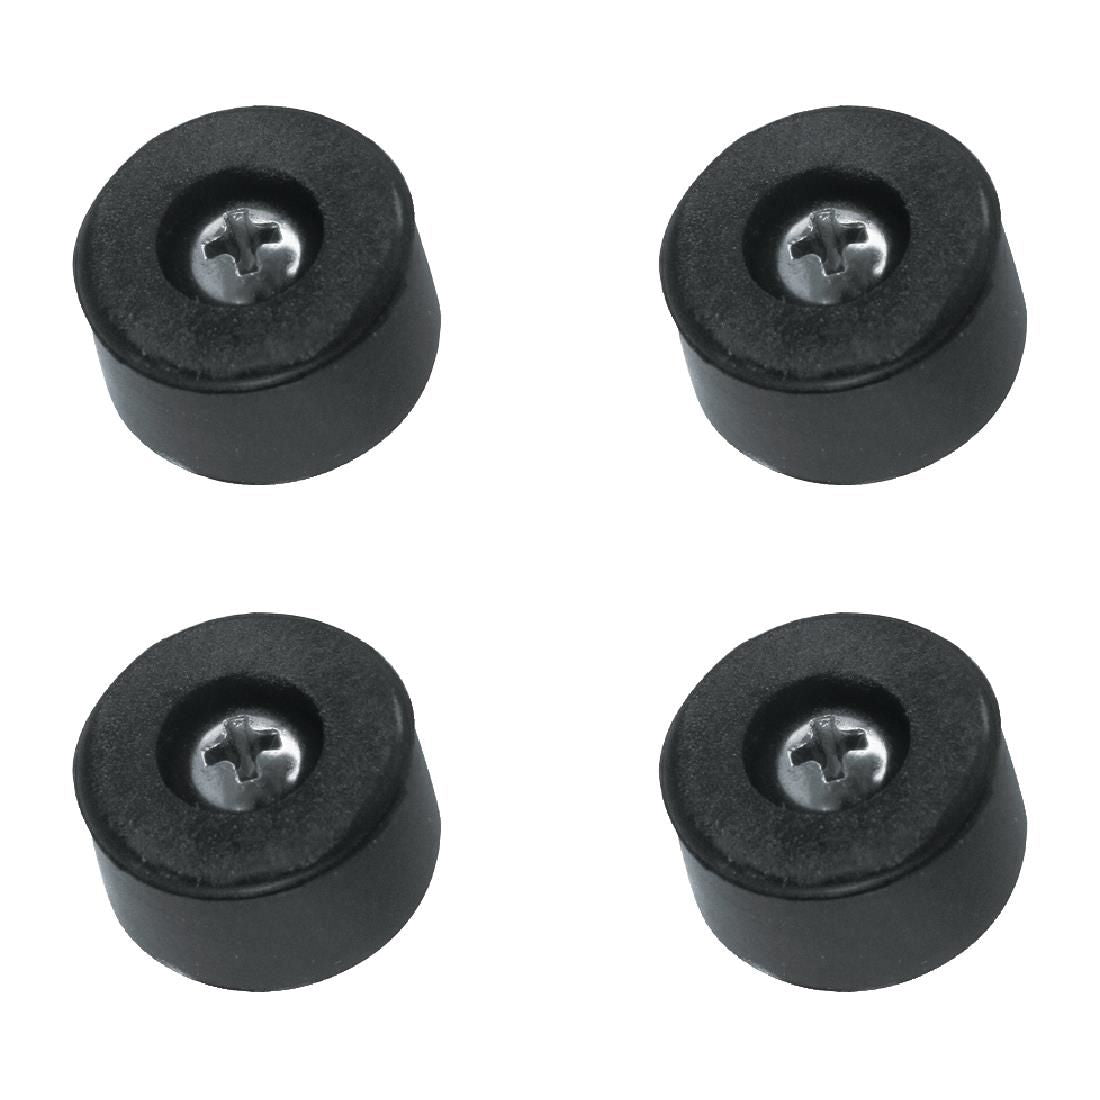 Buffalo Pack of 4 Feet and Screws for Vacuum Packing Machine JD Catering Equipment Solutions Ltd